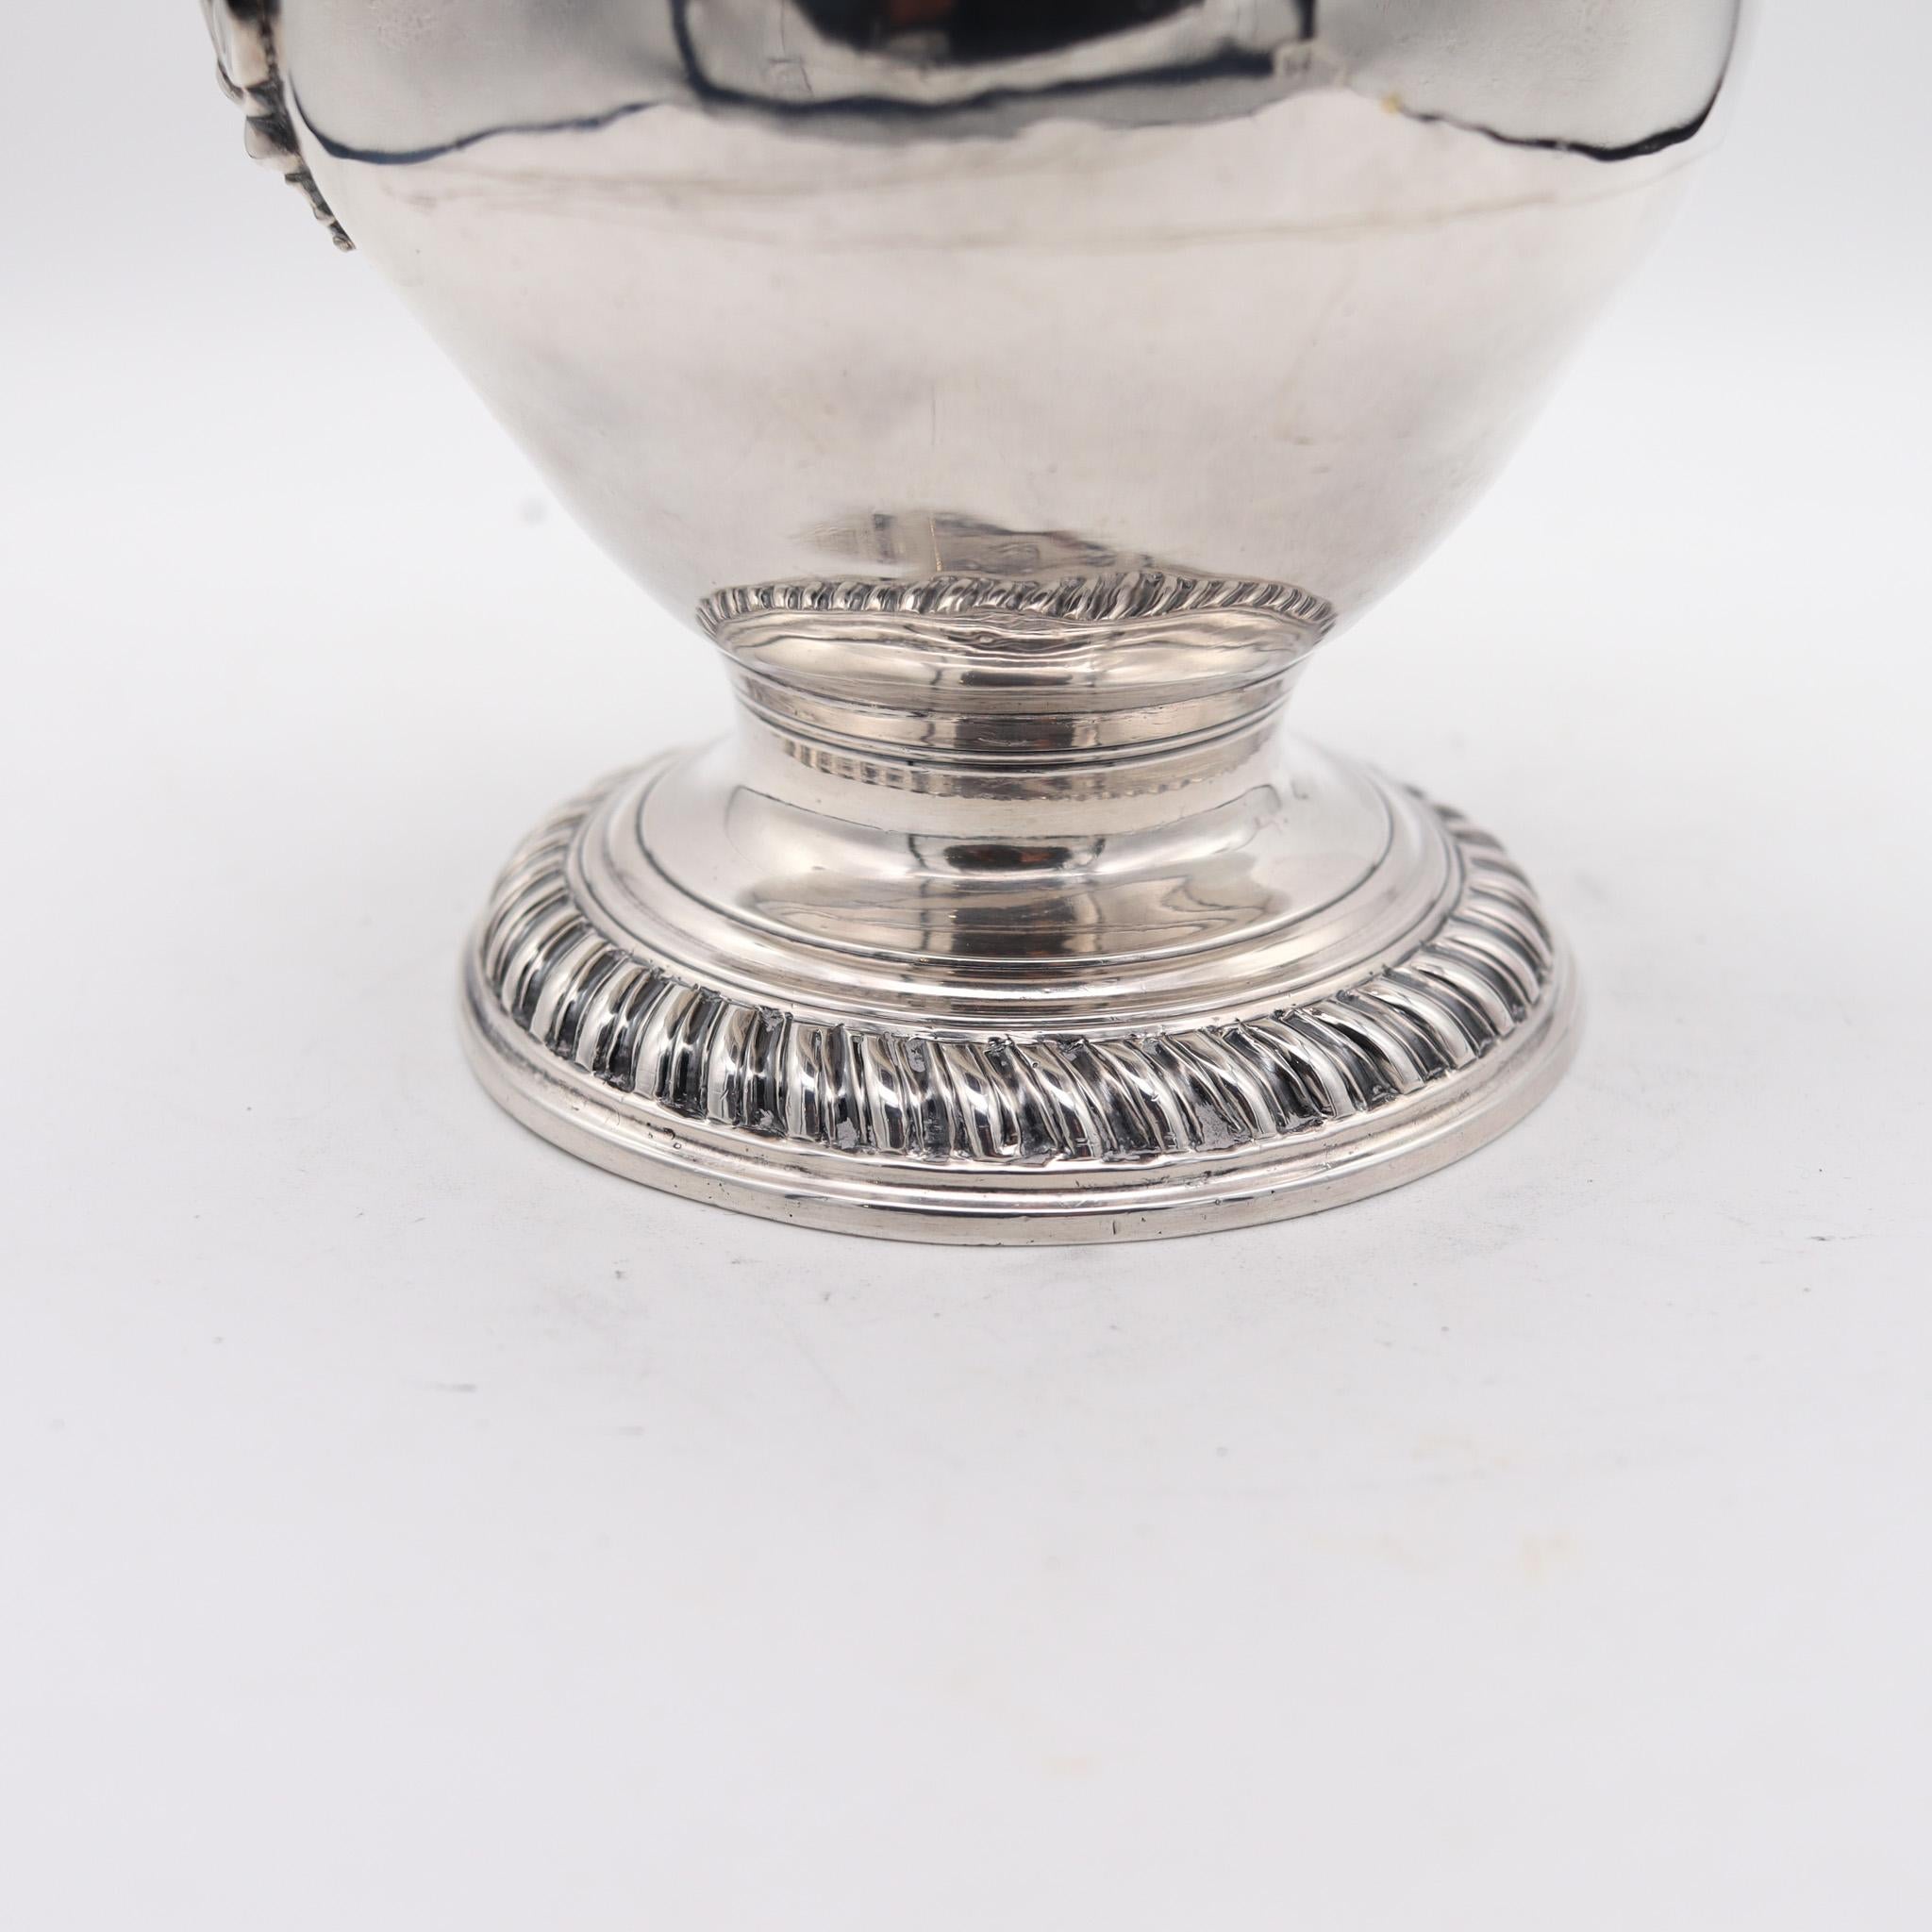 Coffee hot water pot designed in London by Jacob Marsh.

Very rare and important coffee and hot water pot of baluster form on circular spreading foot, created in the city of London in England by the silversmith Jacob Marsh. This beautiful and